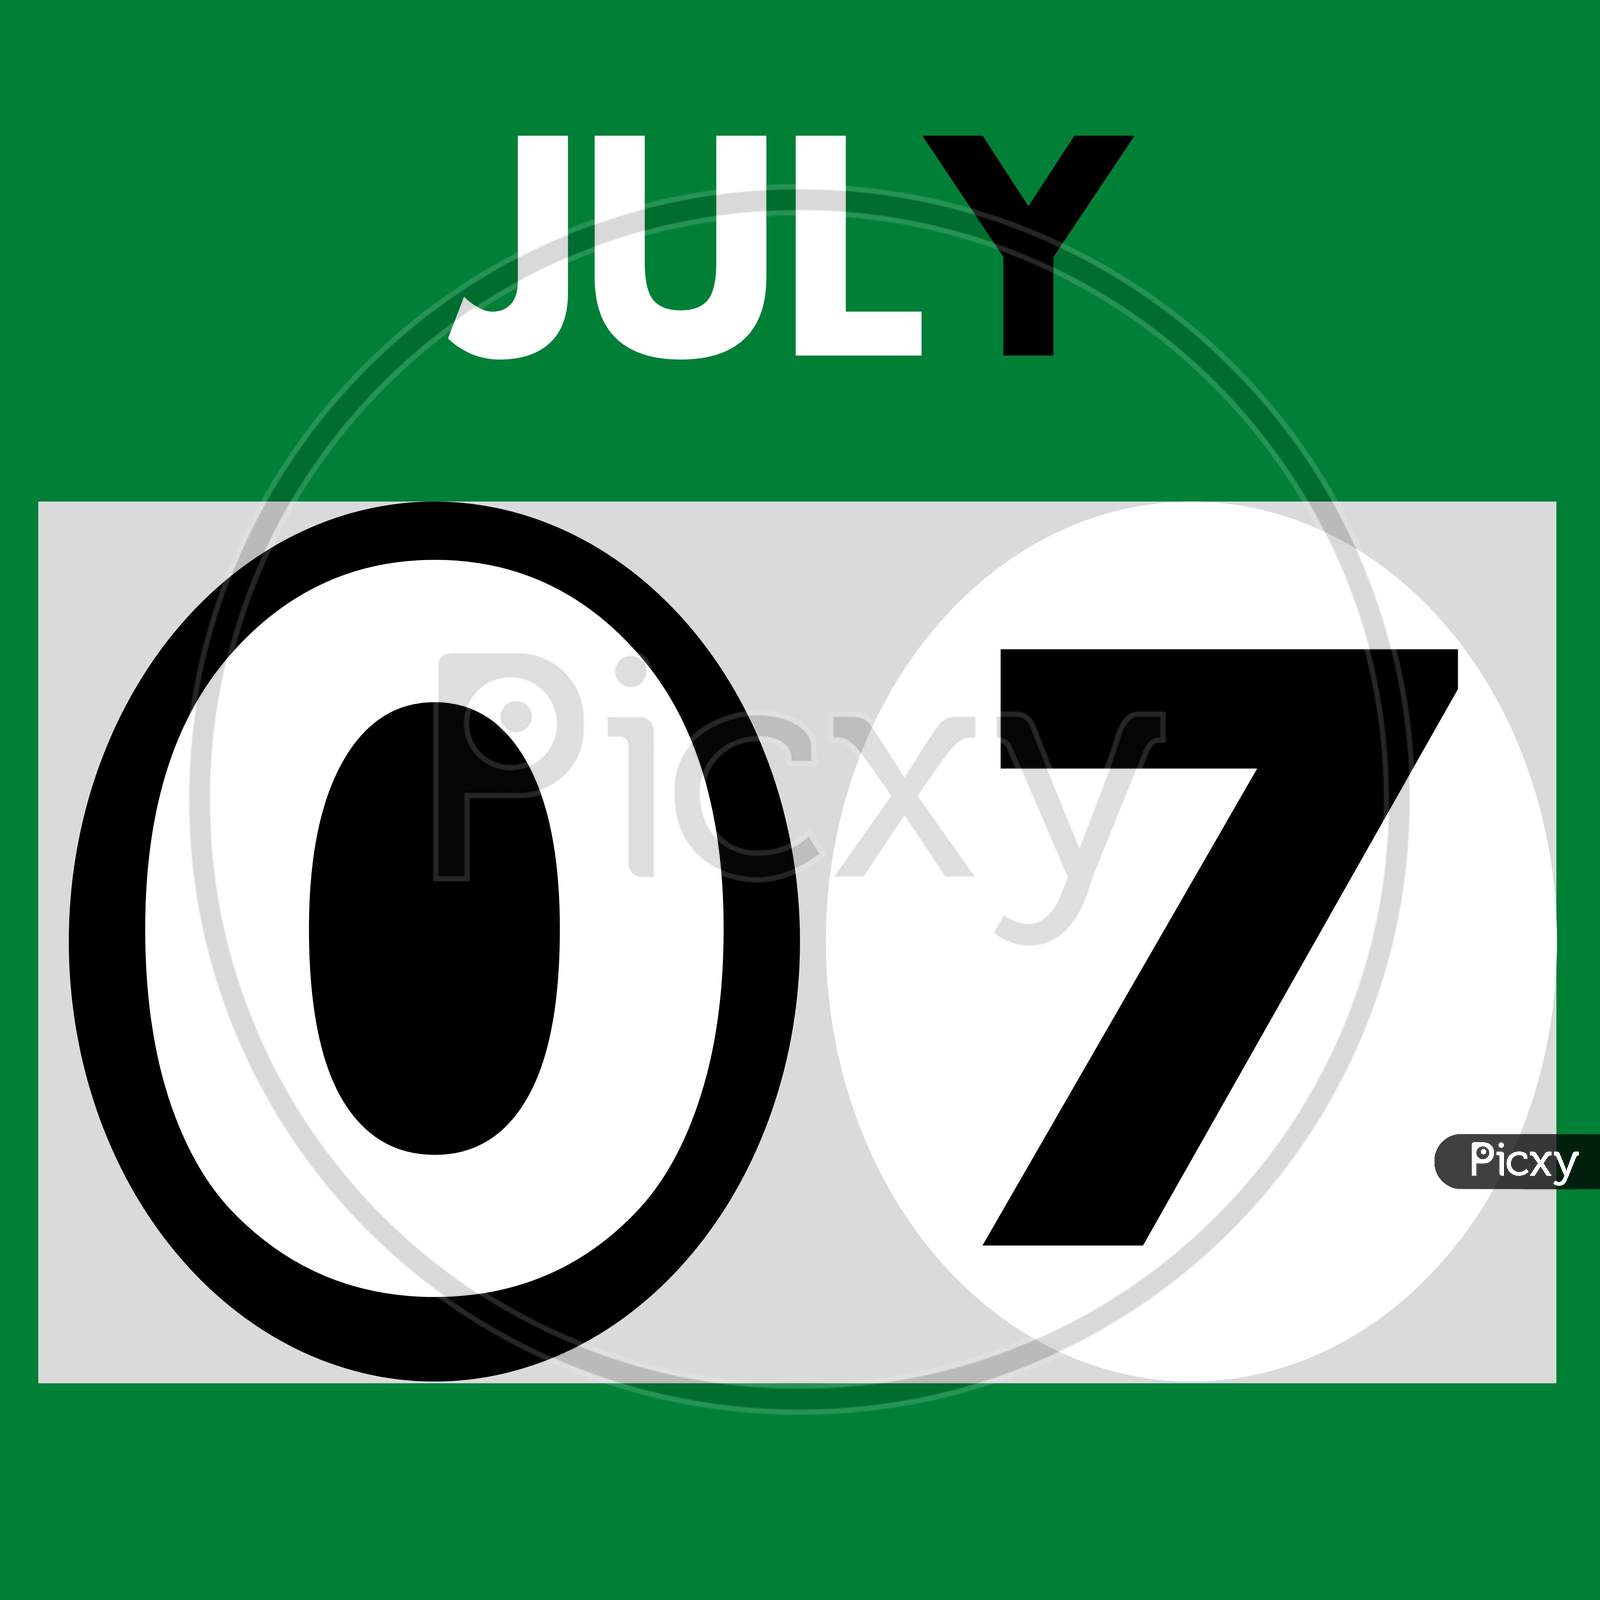 July 7 . Modern Daily Calendar Icon .Date ,Day, Month .Calendar For The Month Of July